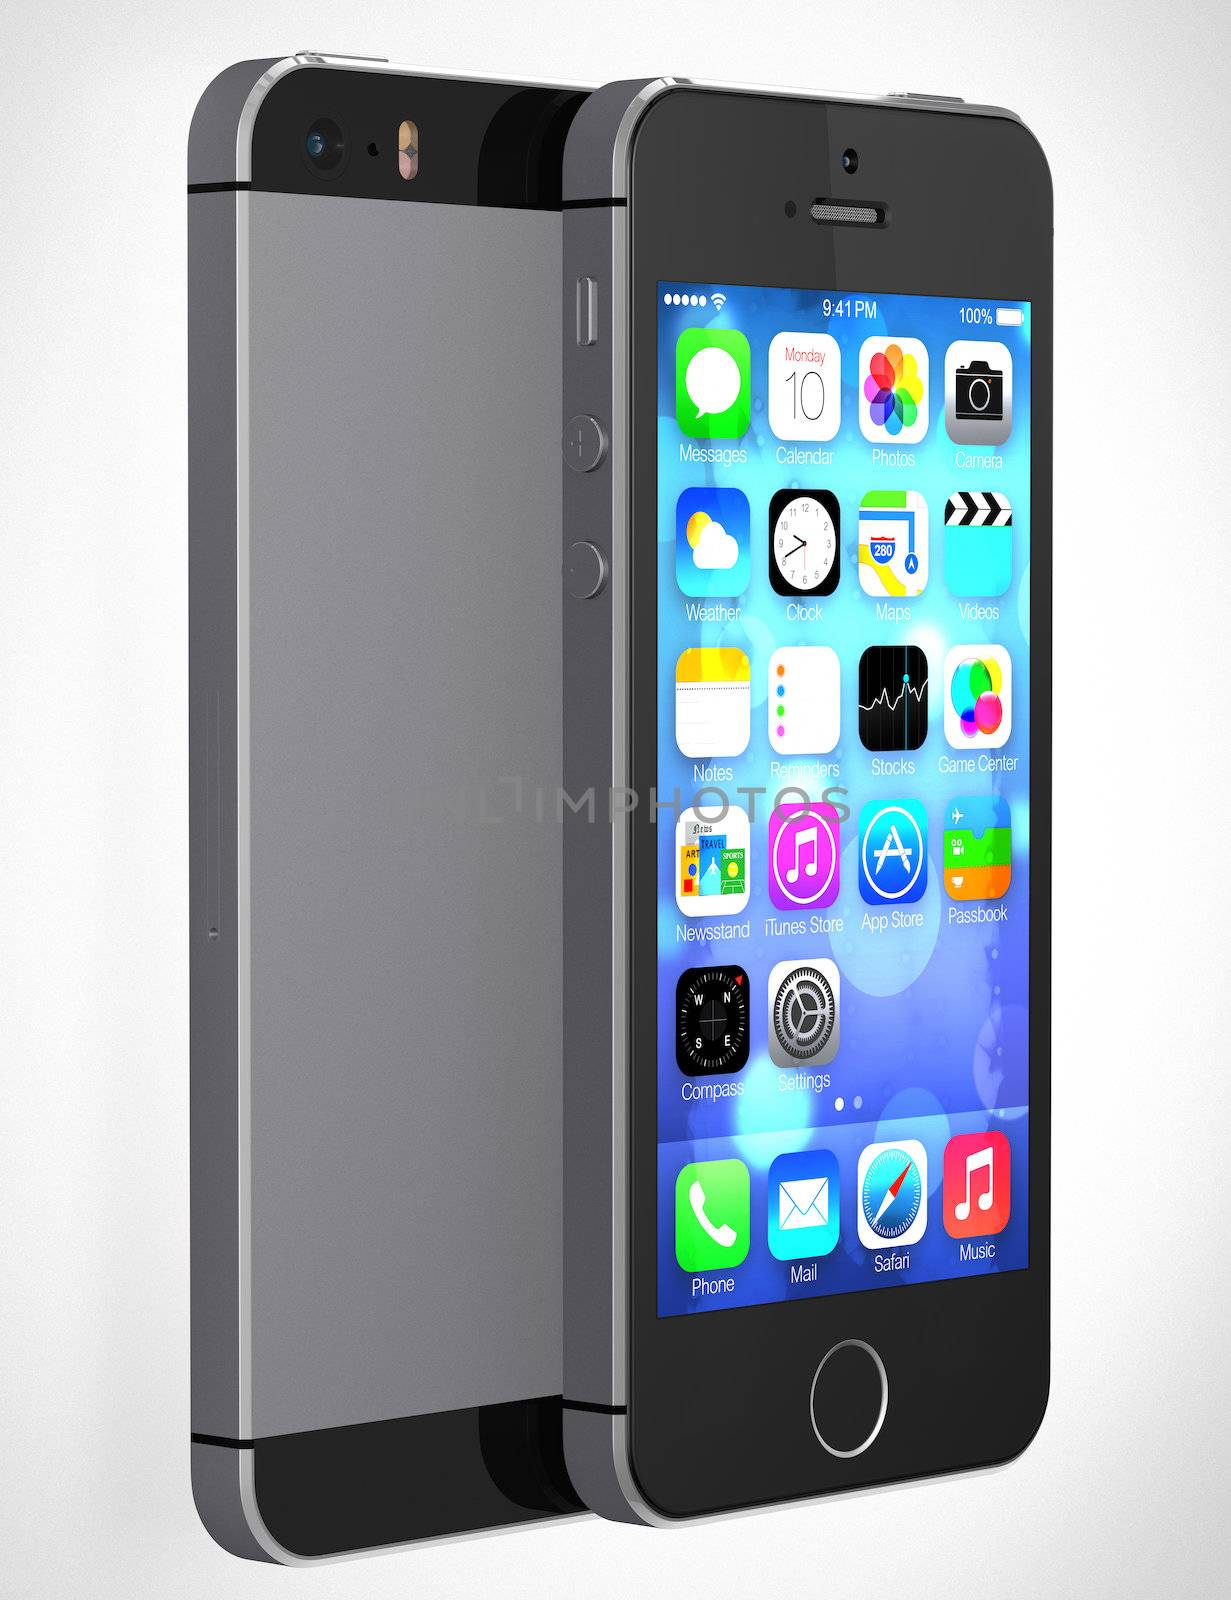 Apple iPhone 5s showing the home screen with iOS7 by manaemedia